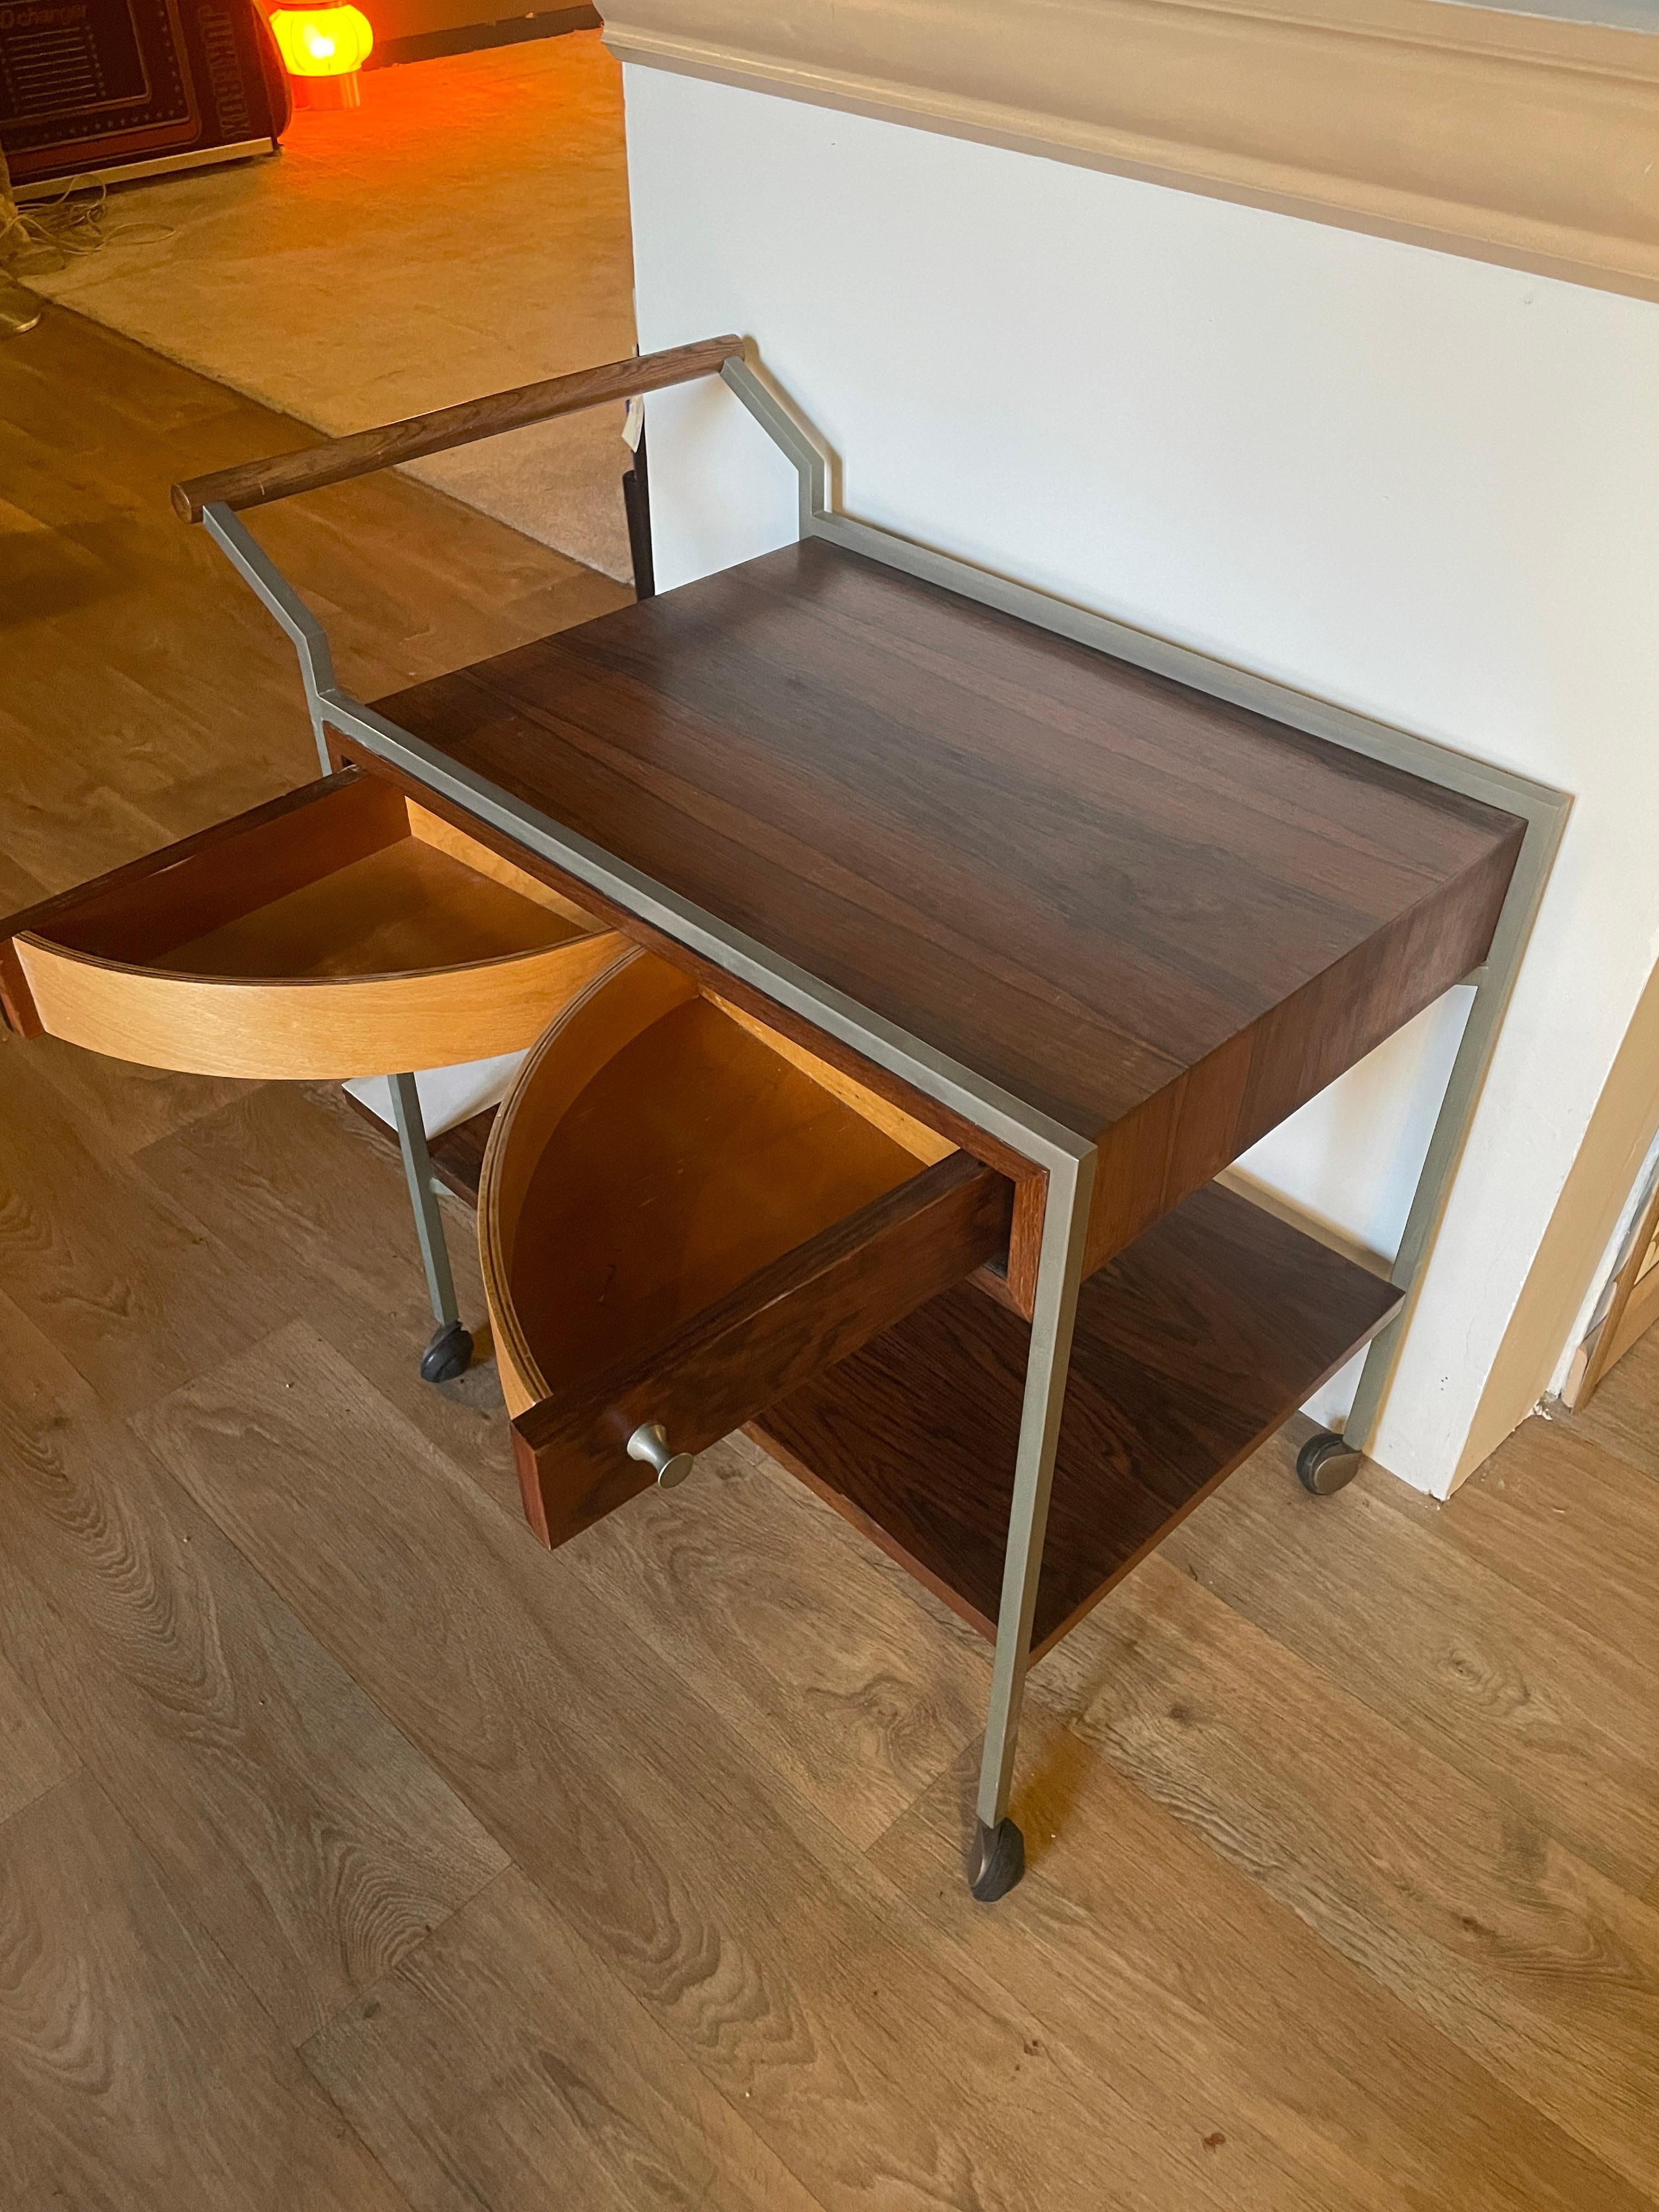 Mid-Century Modern Serving Table Trolley by George Nelson Bar Cocktail 1960 Wood & Steel MidCentury